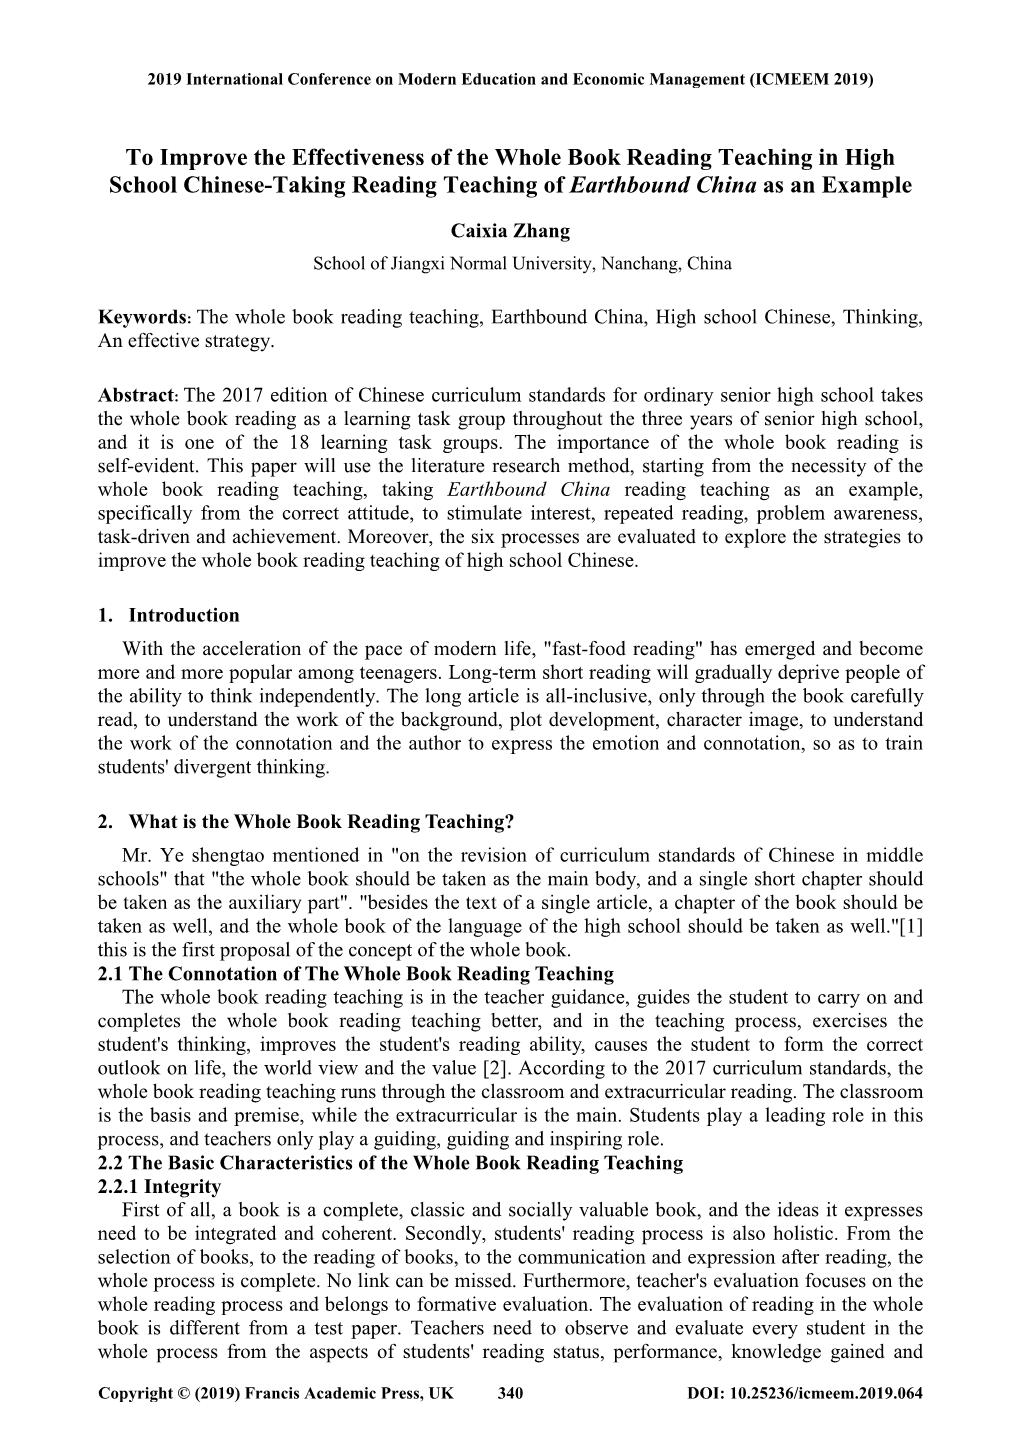 To Improve the Effectiveness of the Whole Book Reading Teaching in High School Chinese-Taking Reading Teaching of Earthbound China As an Example